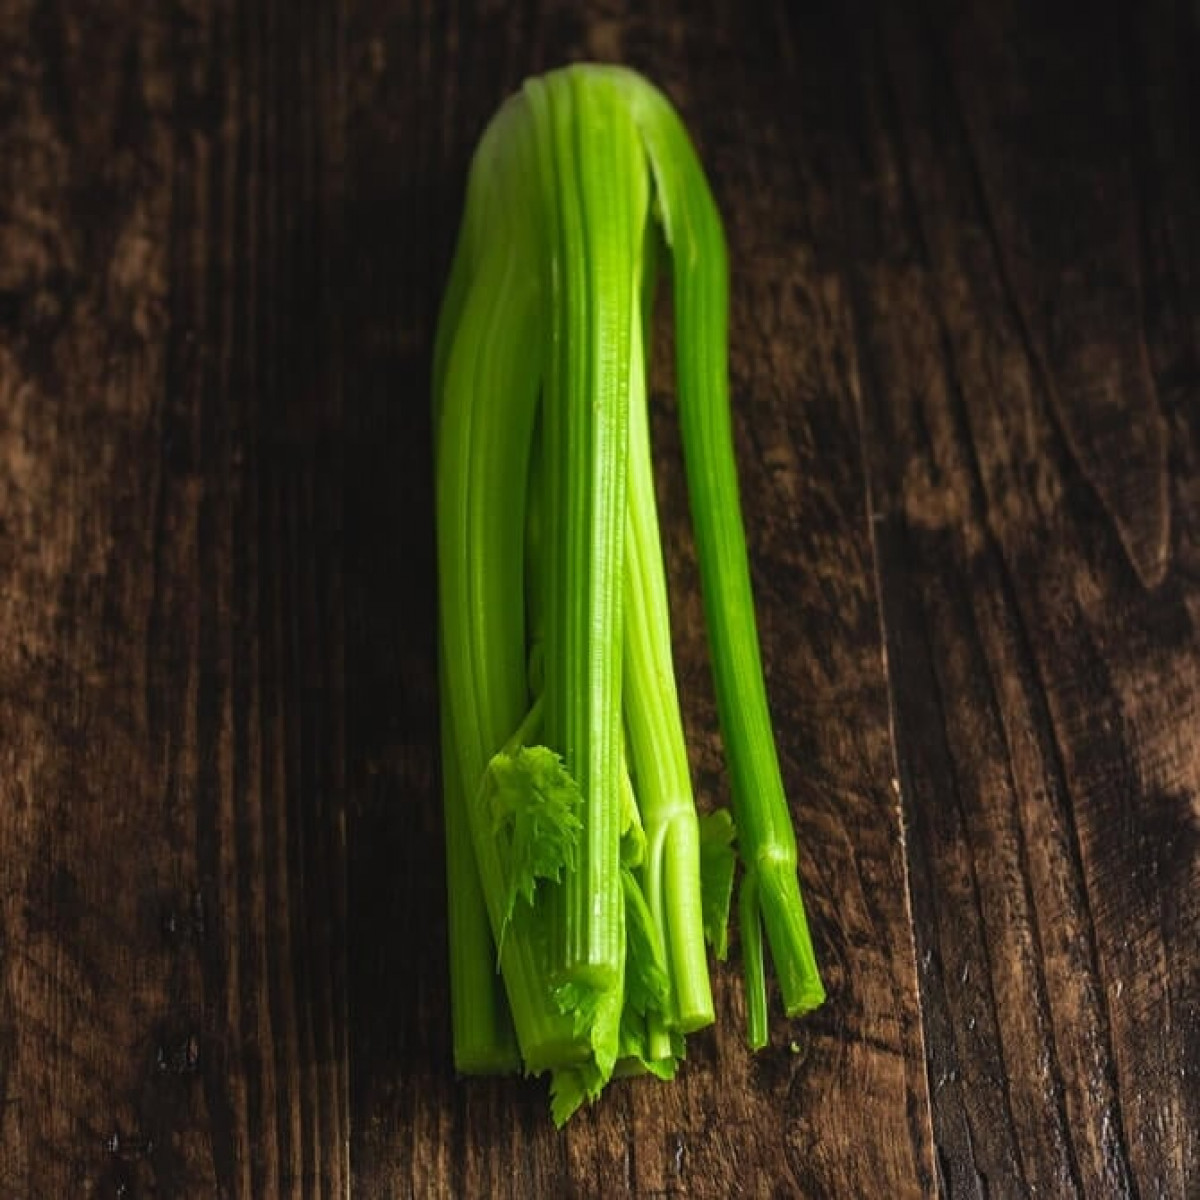 Product picture for Celery, head